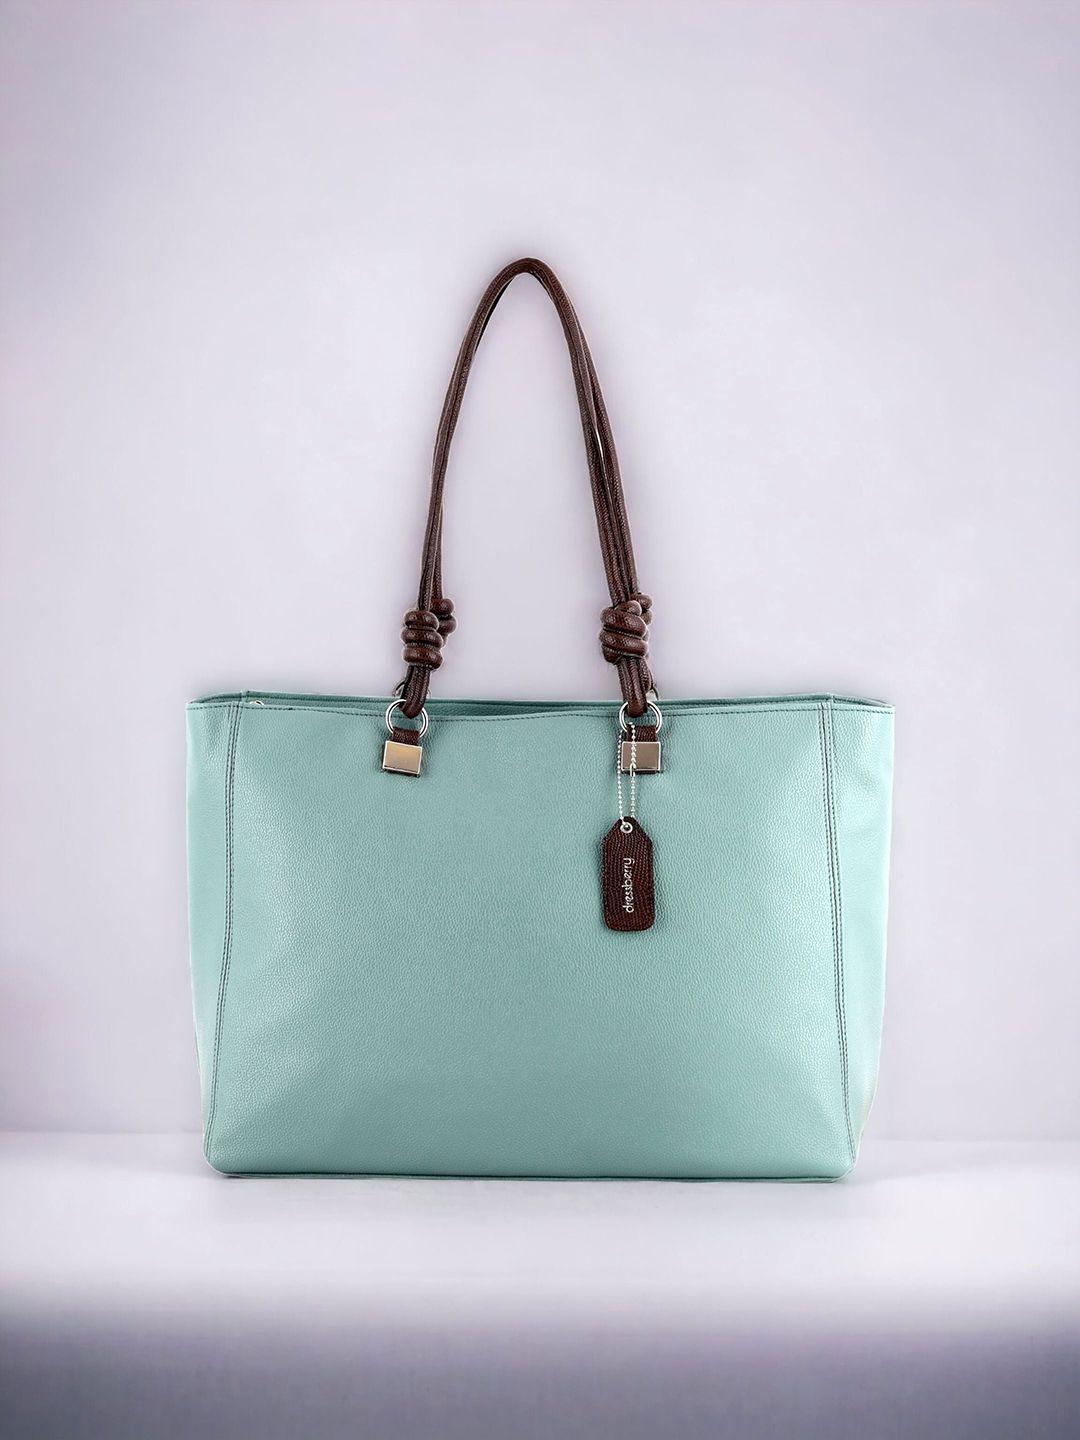 dressberry green pu swagger shoulder bag with tasselled